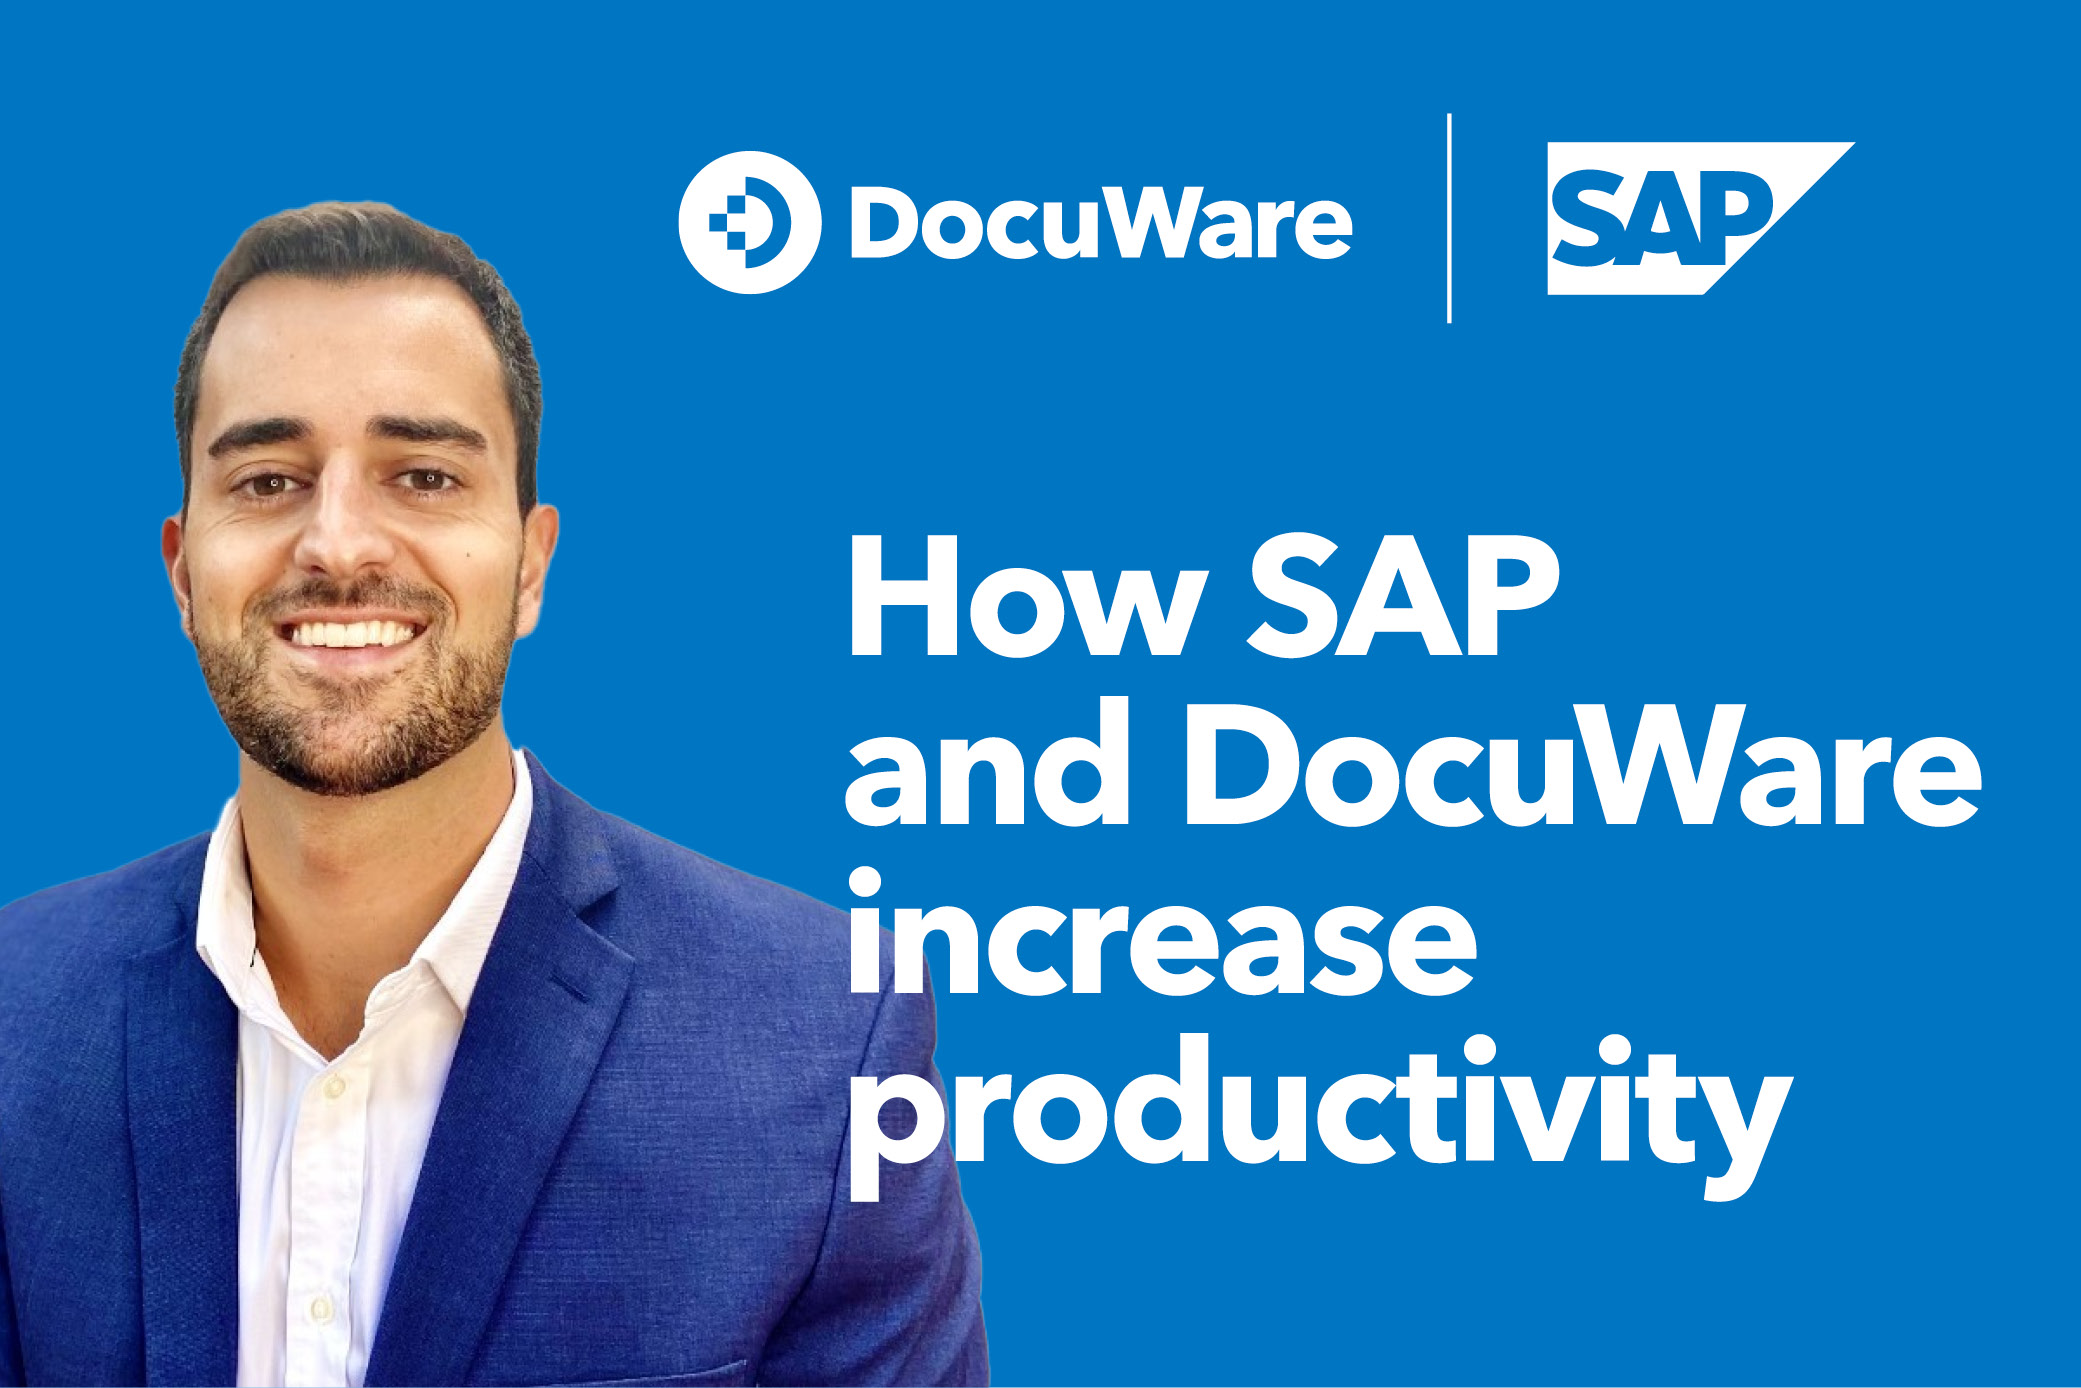 How SAP and DocuWare work together to increase productivity